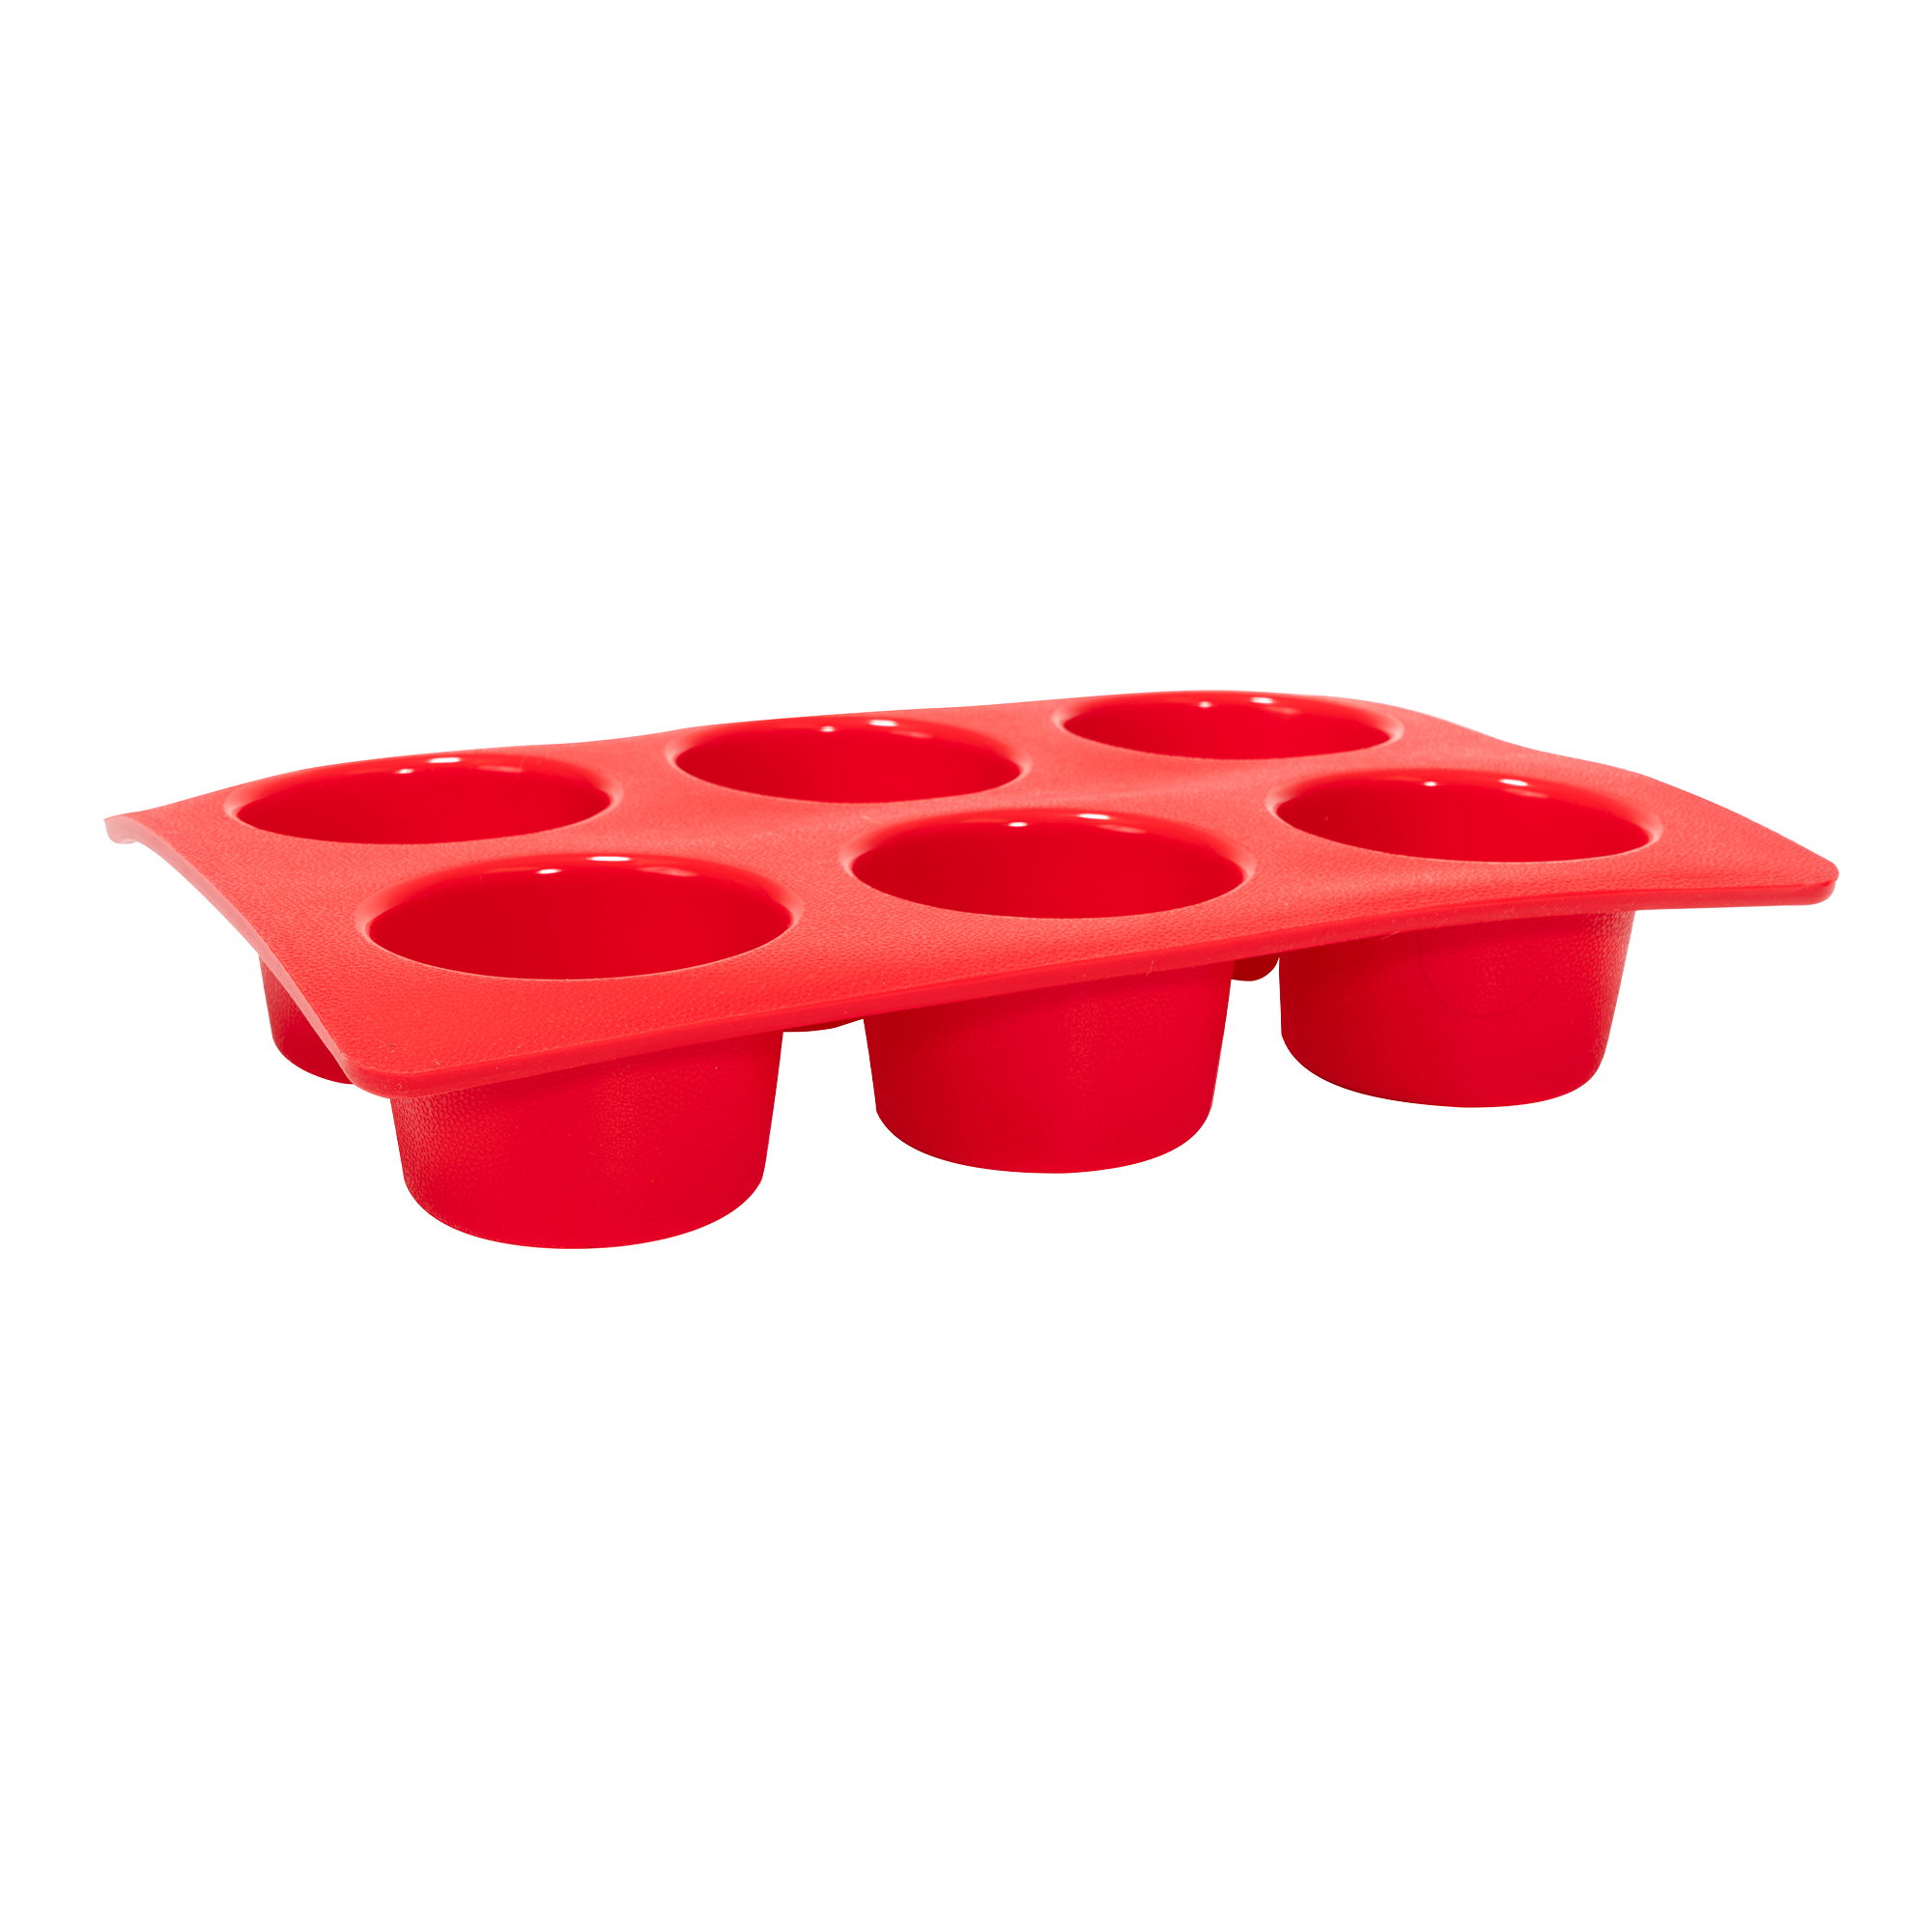 Silicone 6 Cup Jumbo Muffin Pan Mold - Red